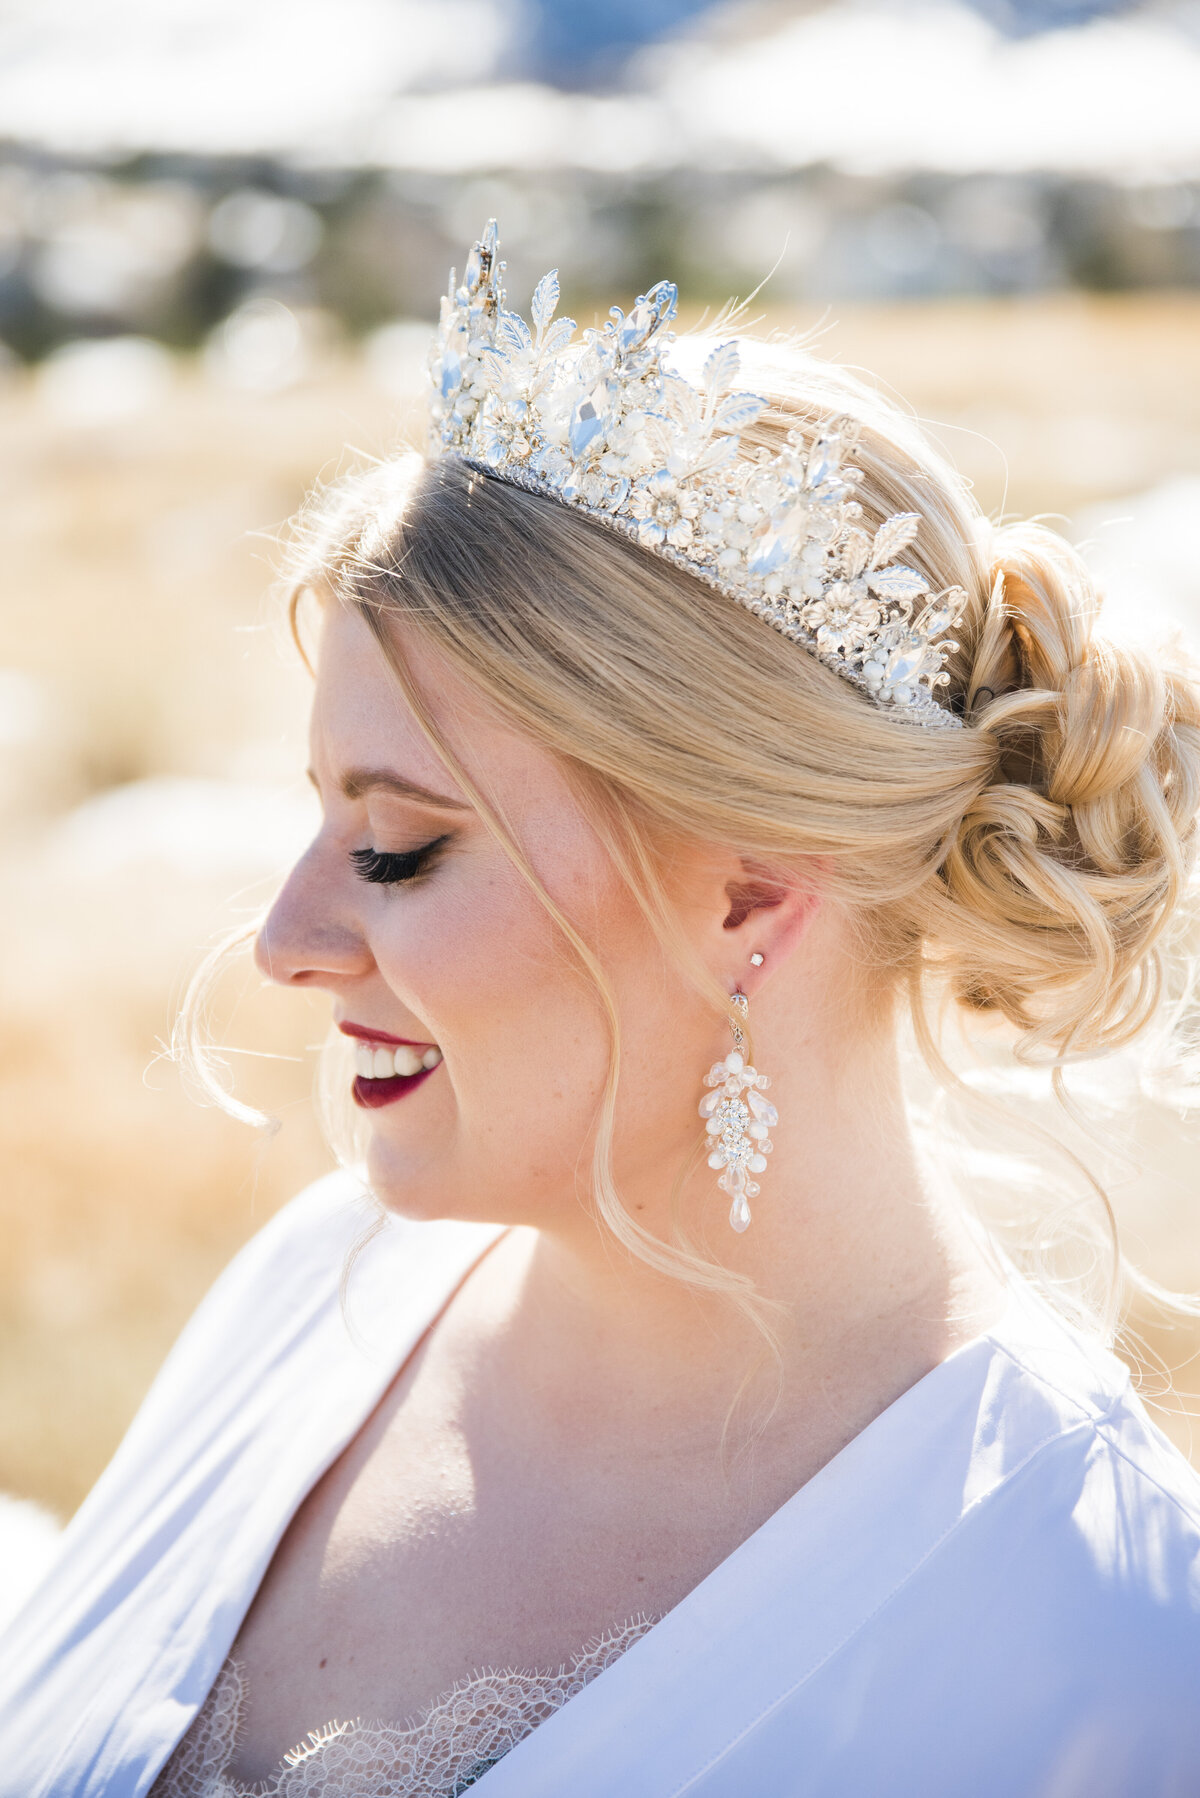 A profile shot of a bride smiling down and wearing a tiara.